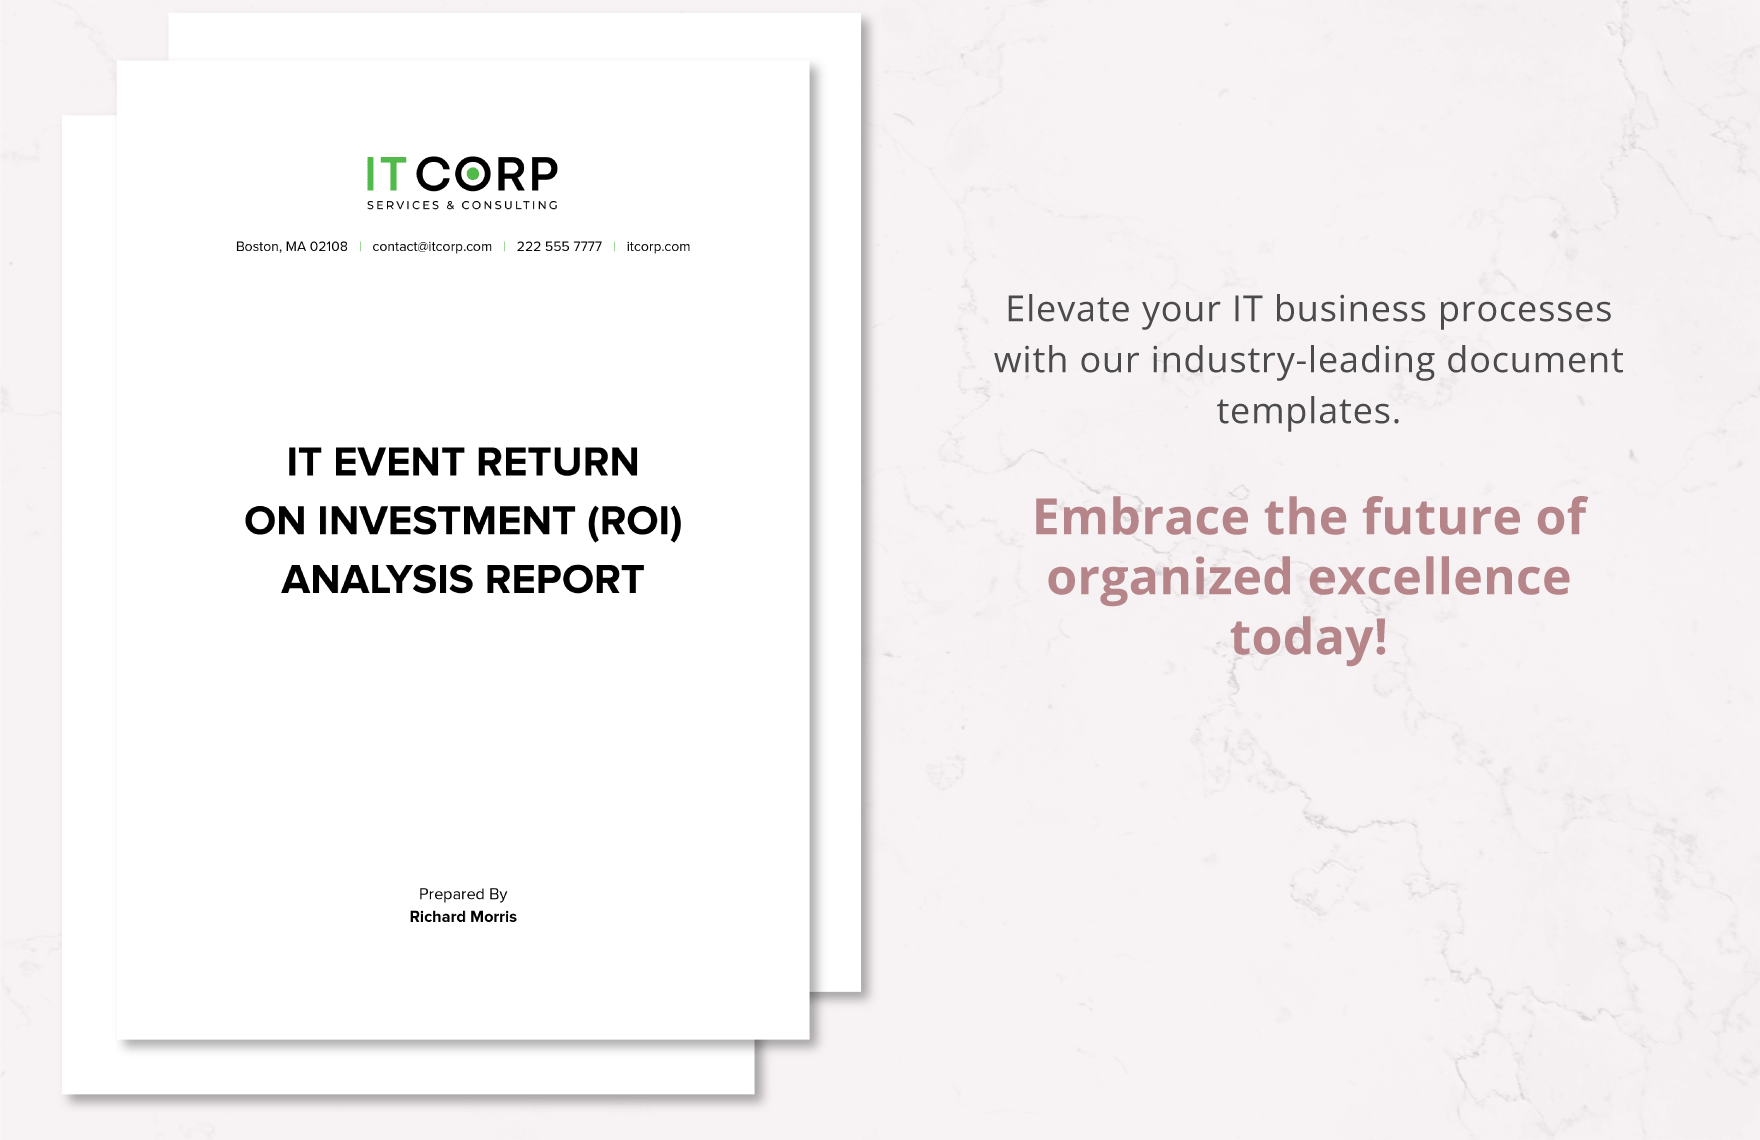 IT Event Return on Investment (ROI) Analysis Report Template